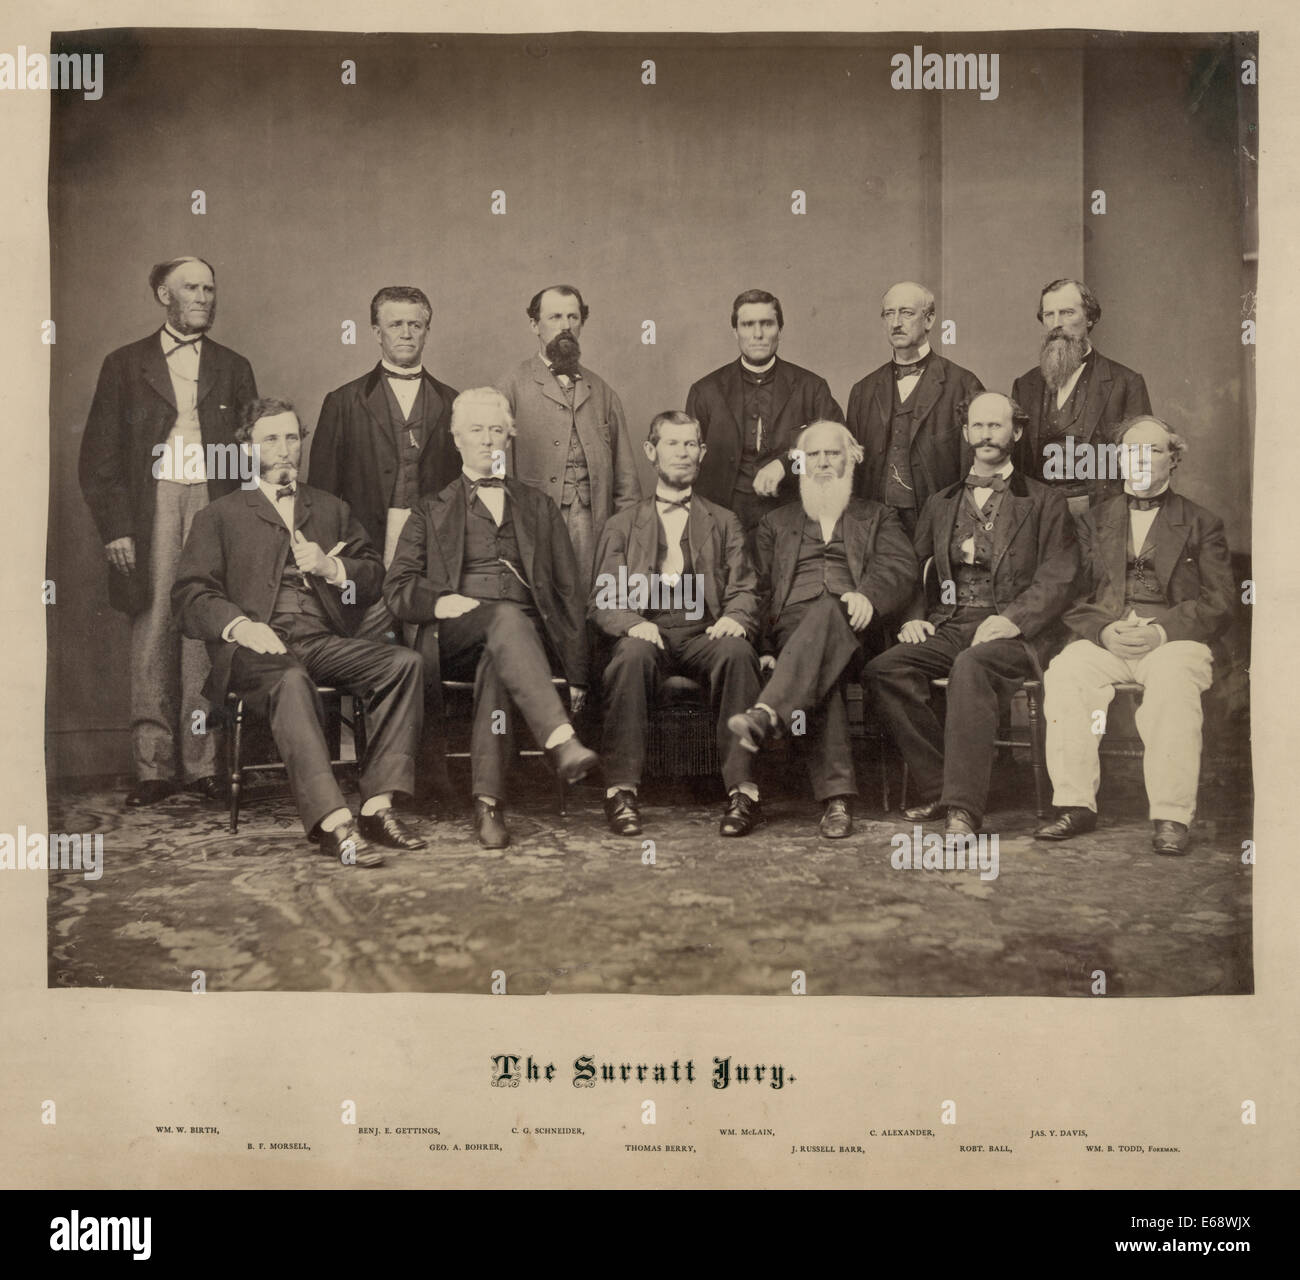 The Surratt Jury - 12 male jurors at the trial of John H. Surratt. The individual jurors are identified by name below the image. 1867 Stock Photo